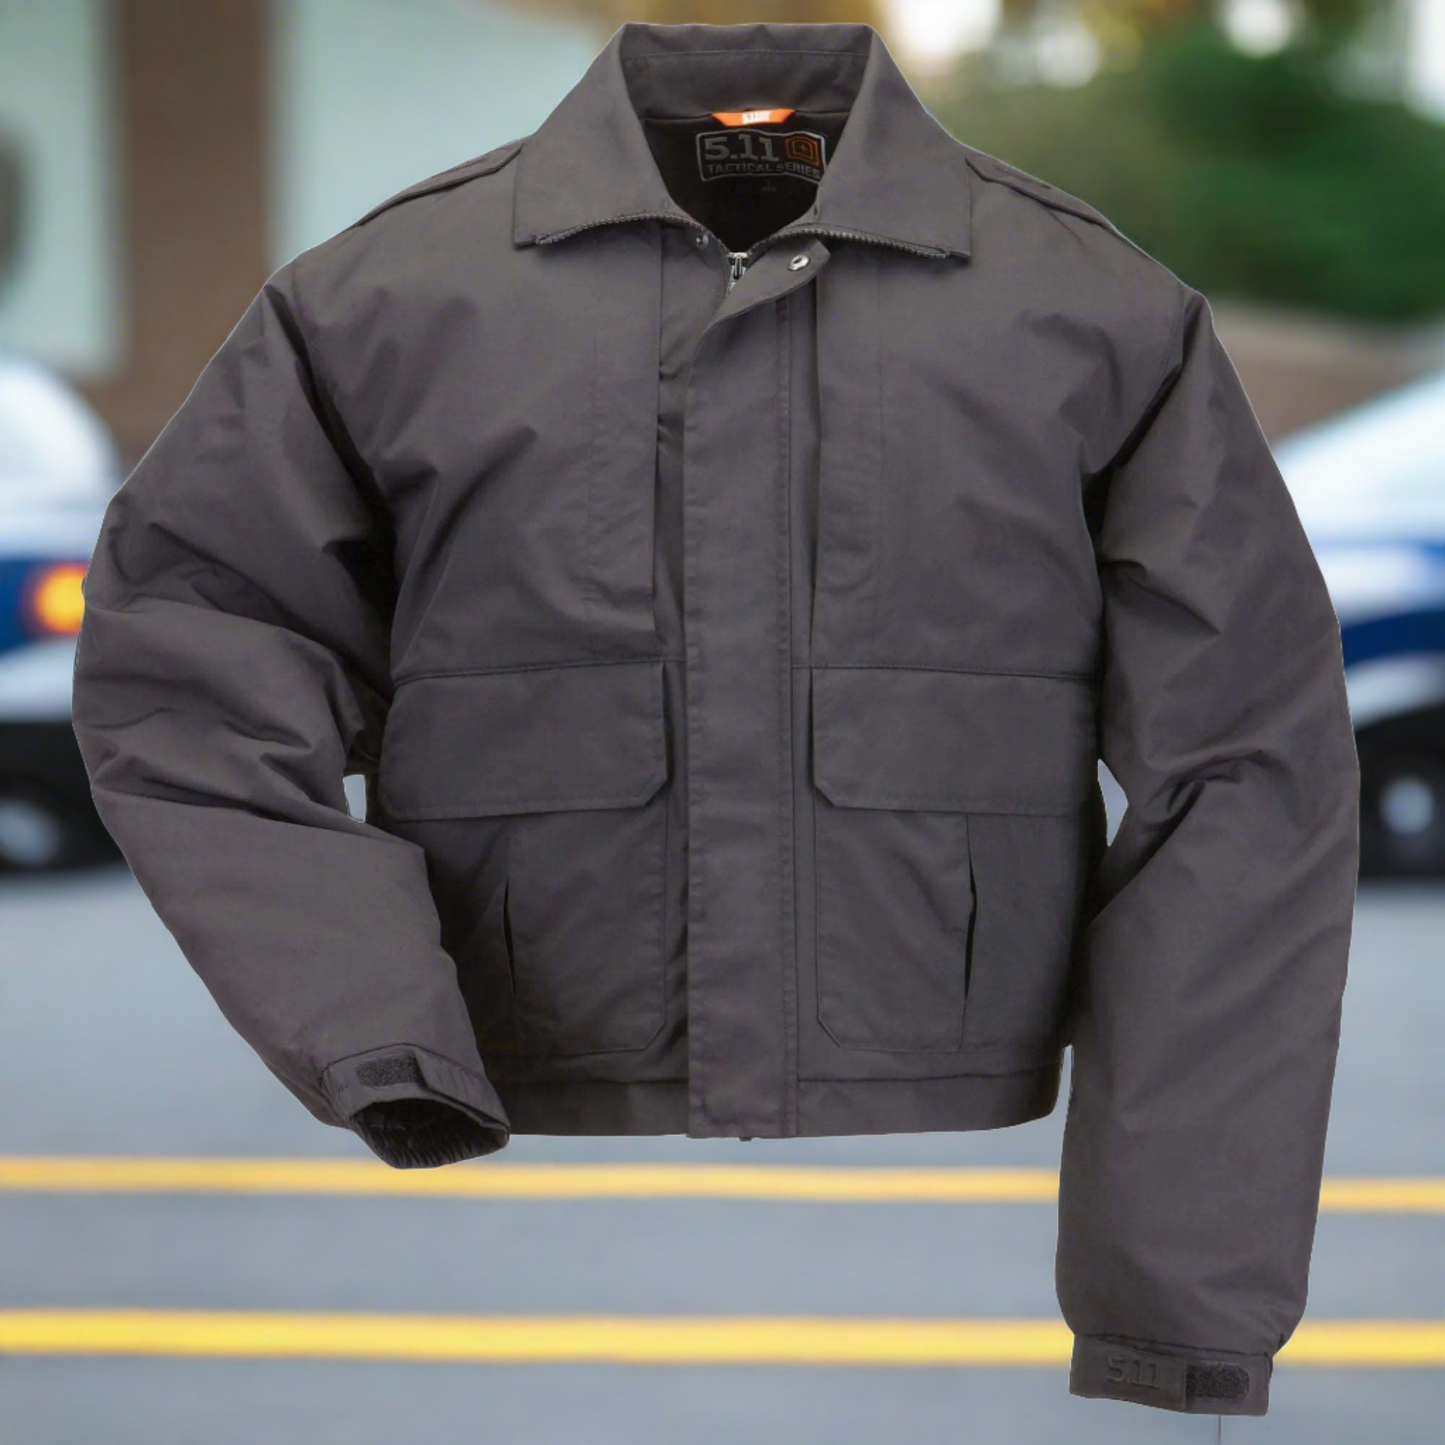 Outerwear - 5.11 Tactical Double Duty Jacket